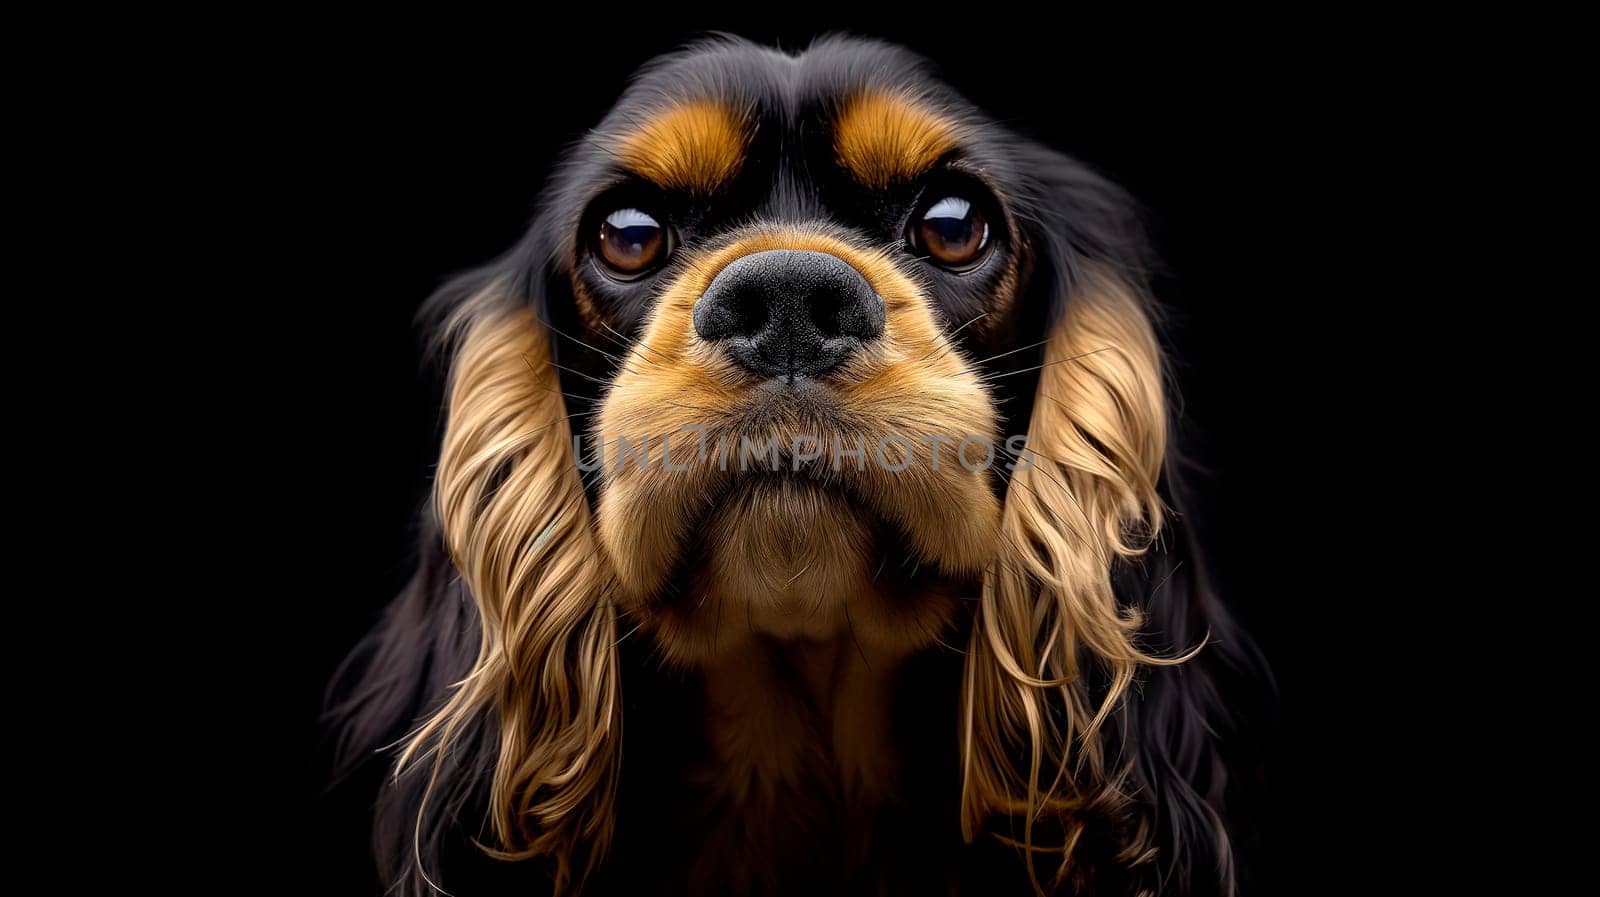 This image captures a detailed close-up of a Cavalier King Charles Spaniel, showcasing its soulful eyes and shiny coat against a stark black background.